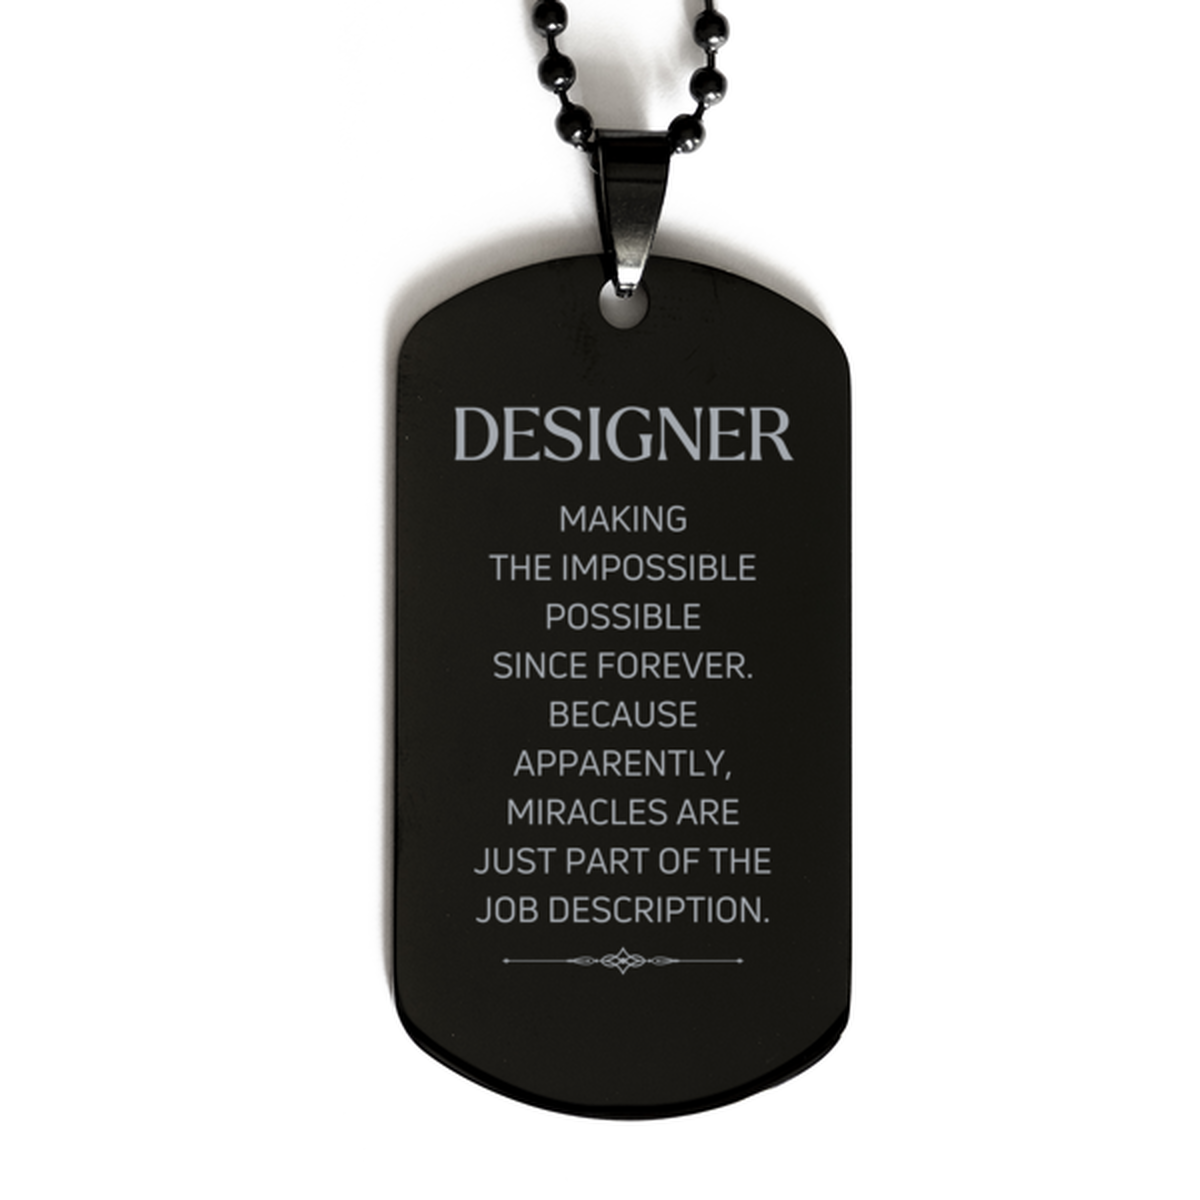 Funny Designer Gifts, Miracles are just part of the job description, Inspirational Birthday Black Dog Tag For Designer, Men, Women, Coworkers, Friends, Boss